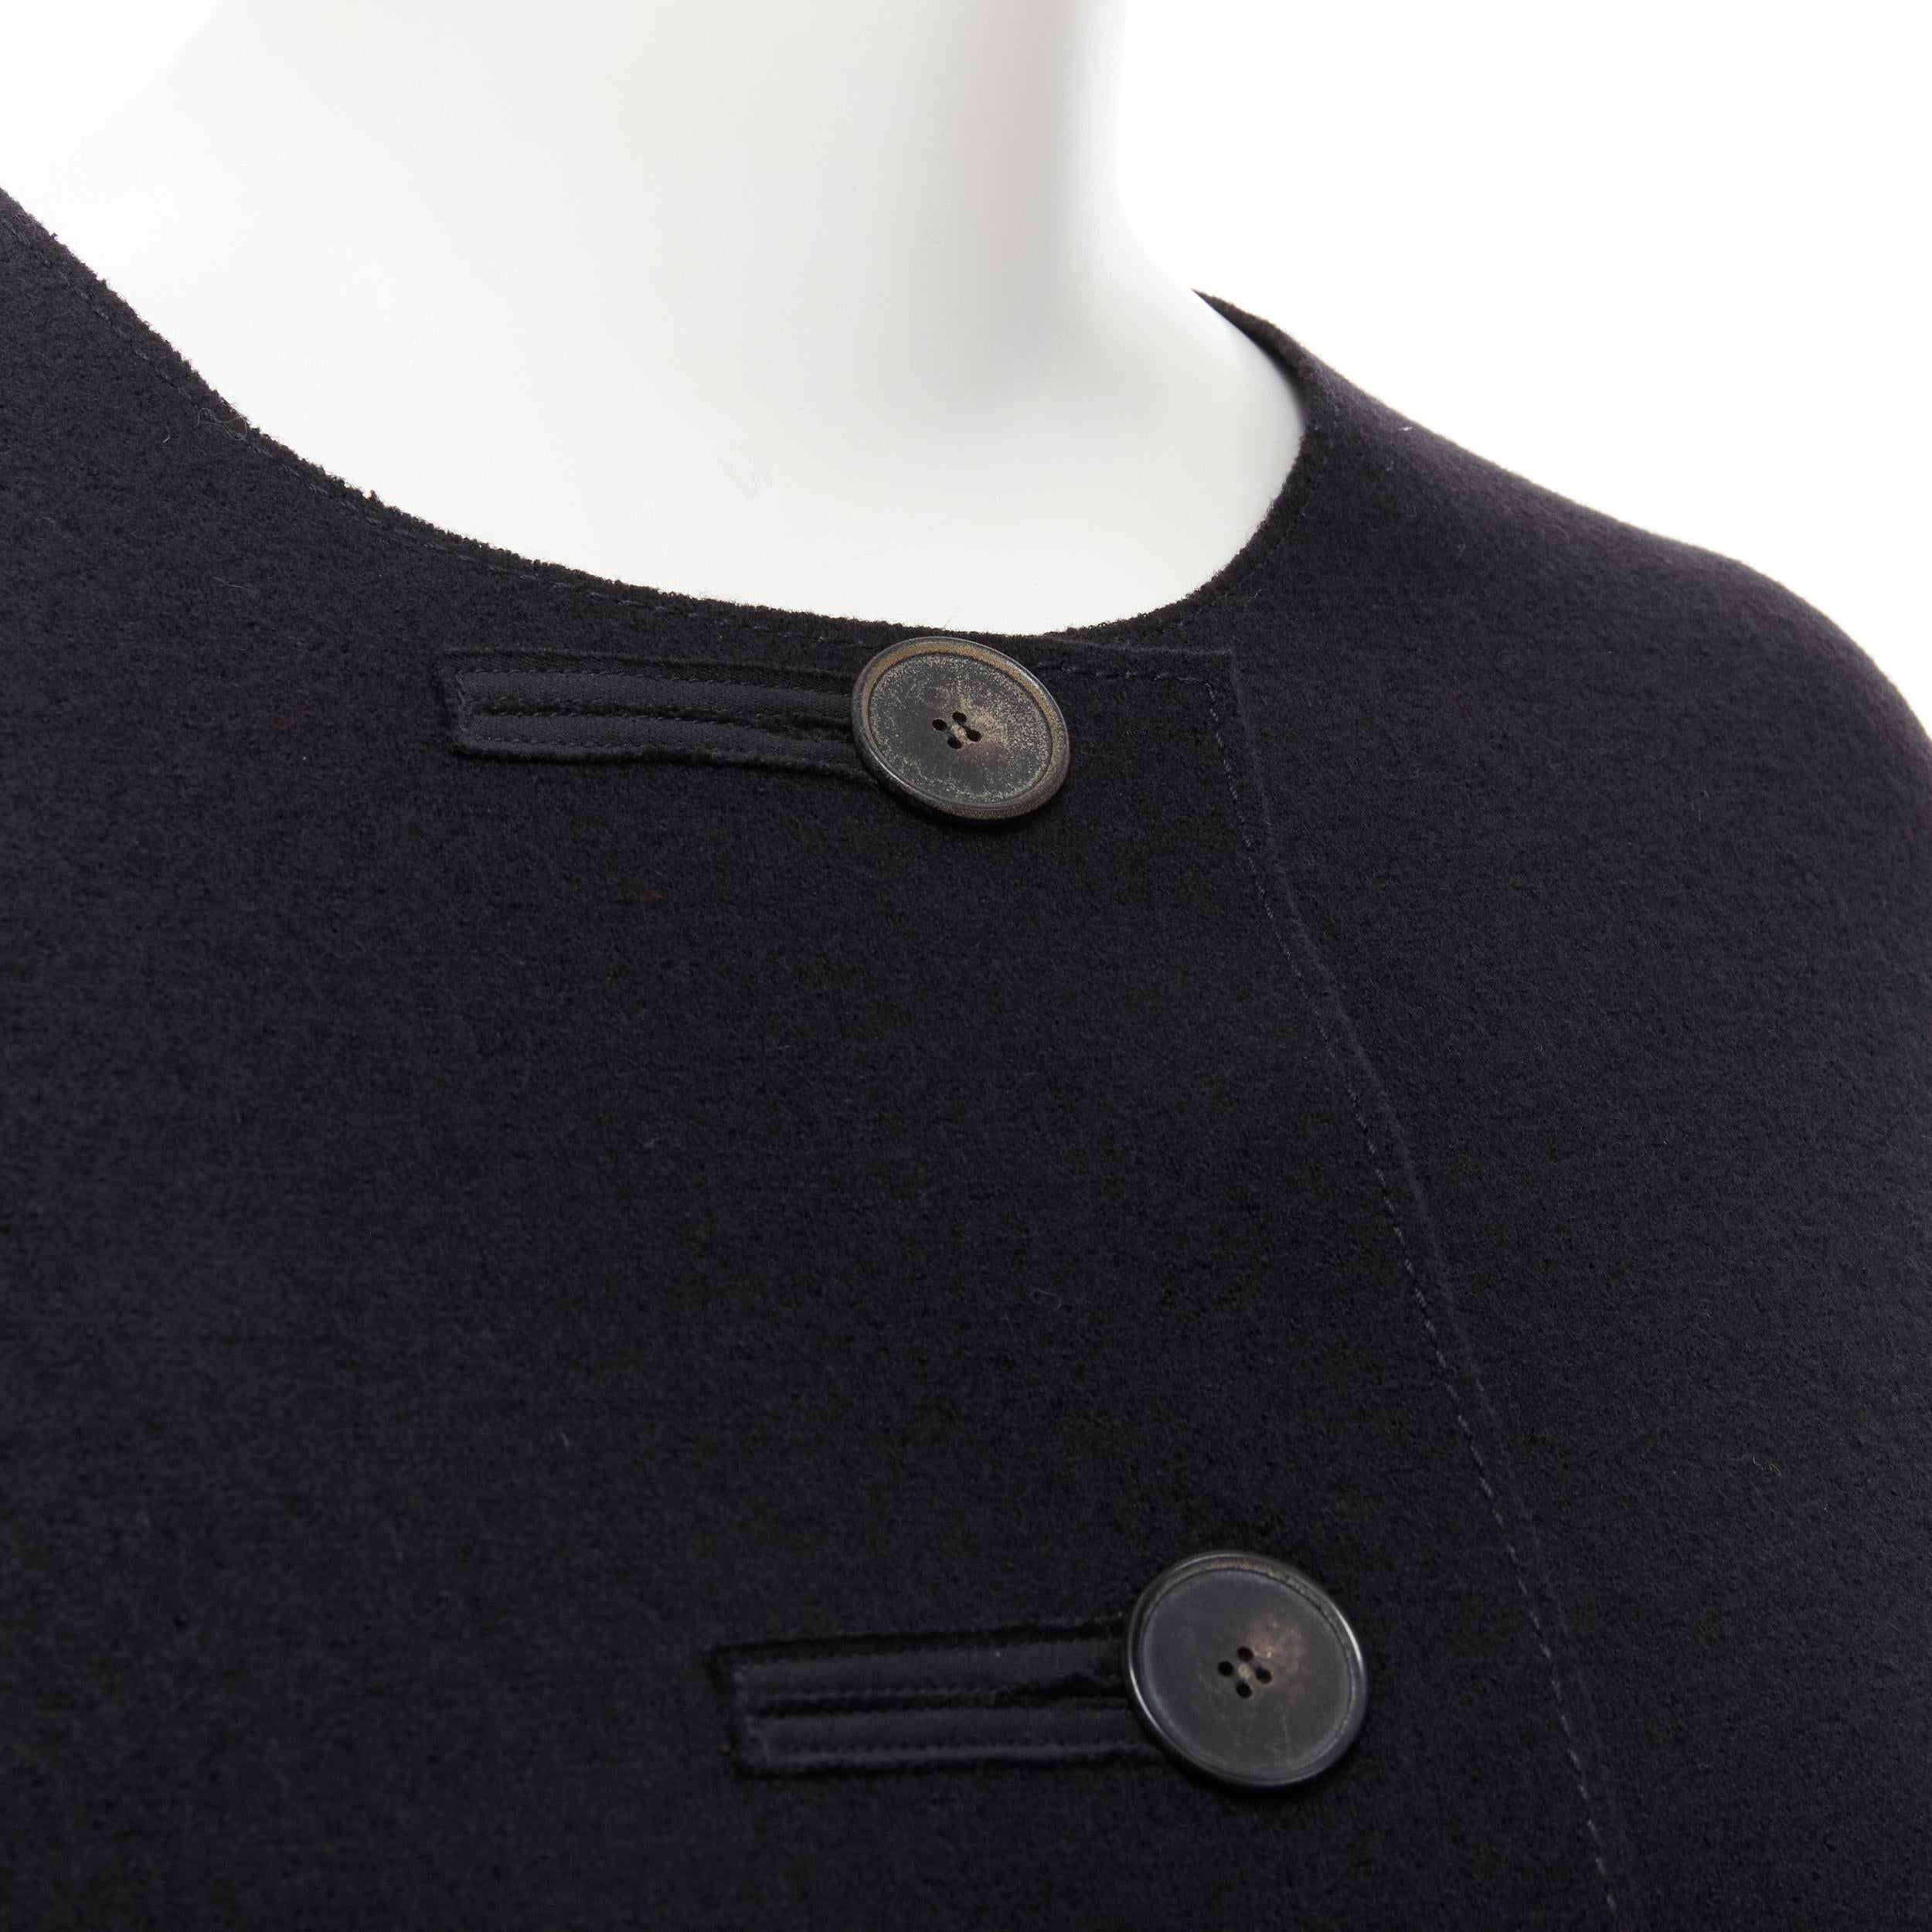 LANVIN Alber Elbaz 2004 black wool pinched darts button front fitted coat FR38 S 
Reference: CELG/A00158 
Brand: Lanvin 
Designer: Alber Elbaz 
Collection: Fall Winter 2004 
Material: Wool 
Color: Black 
Pattern: Solid 
Closure: Button 
Extra